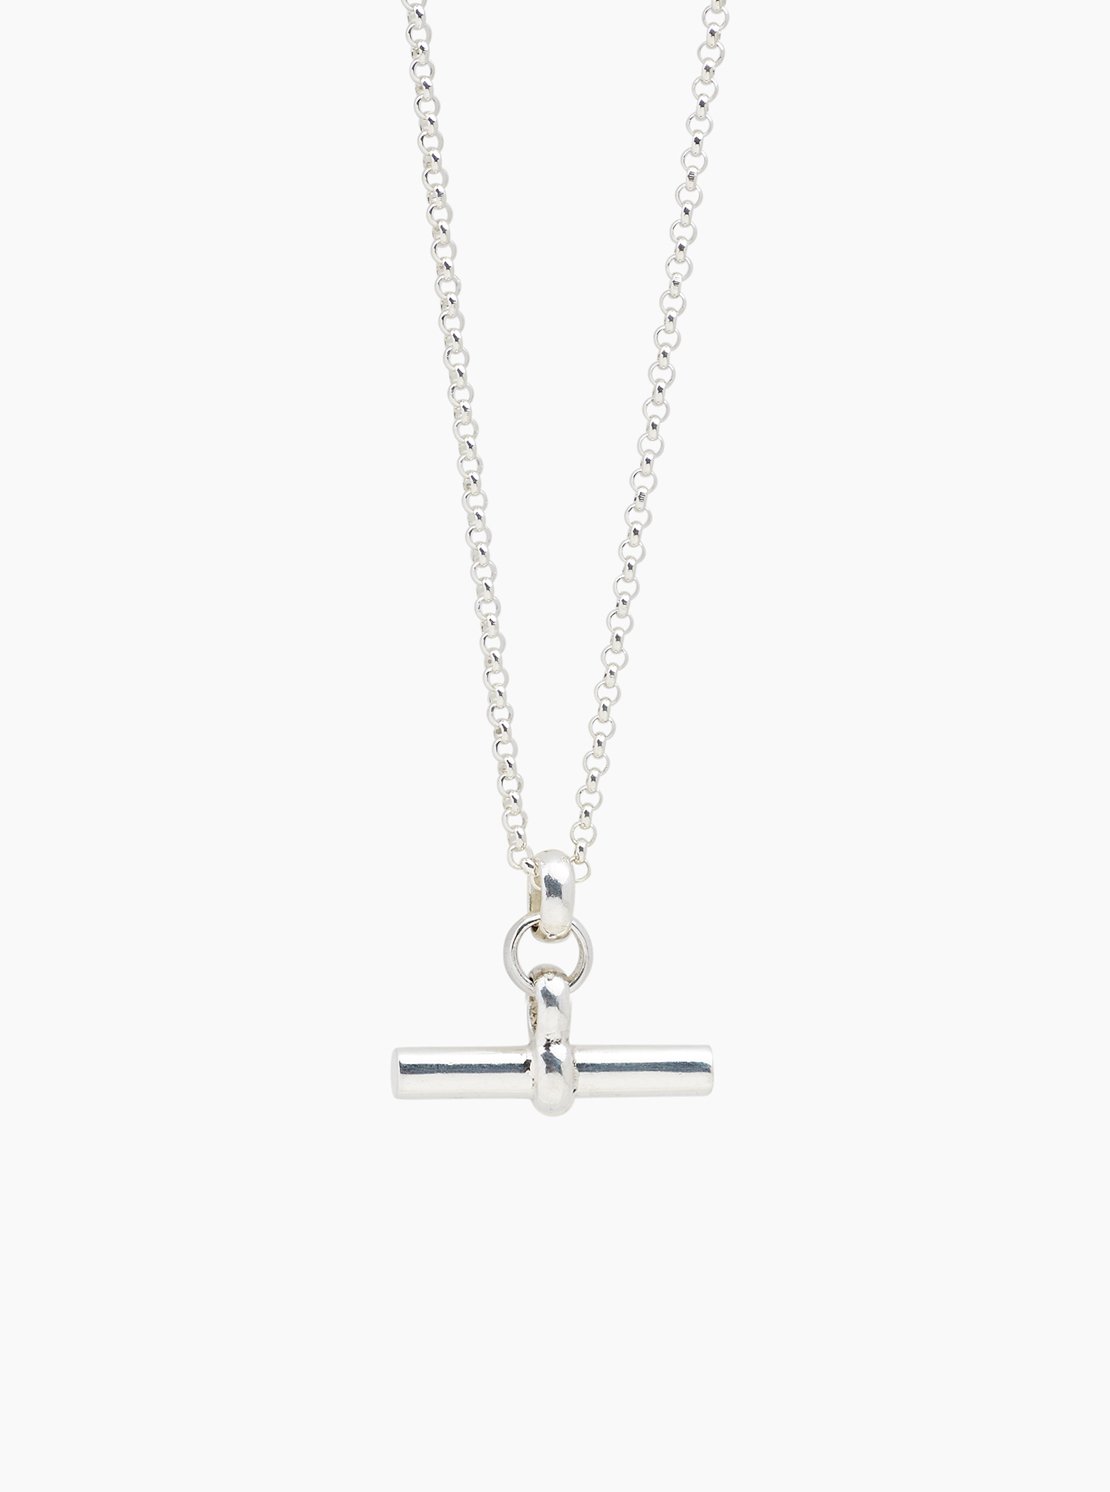 NAJO Curb T-bar Silver Necklace 45cm – Etheringtons